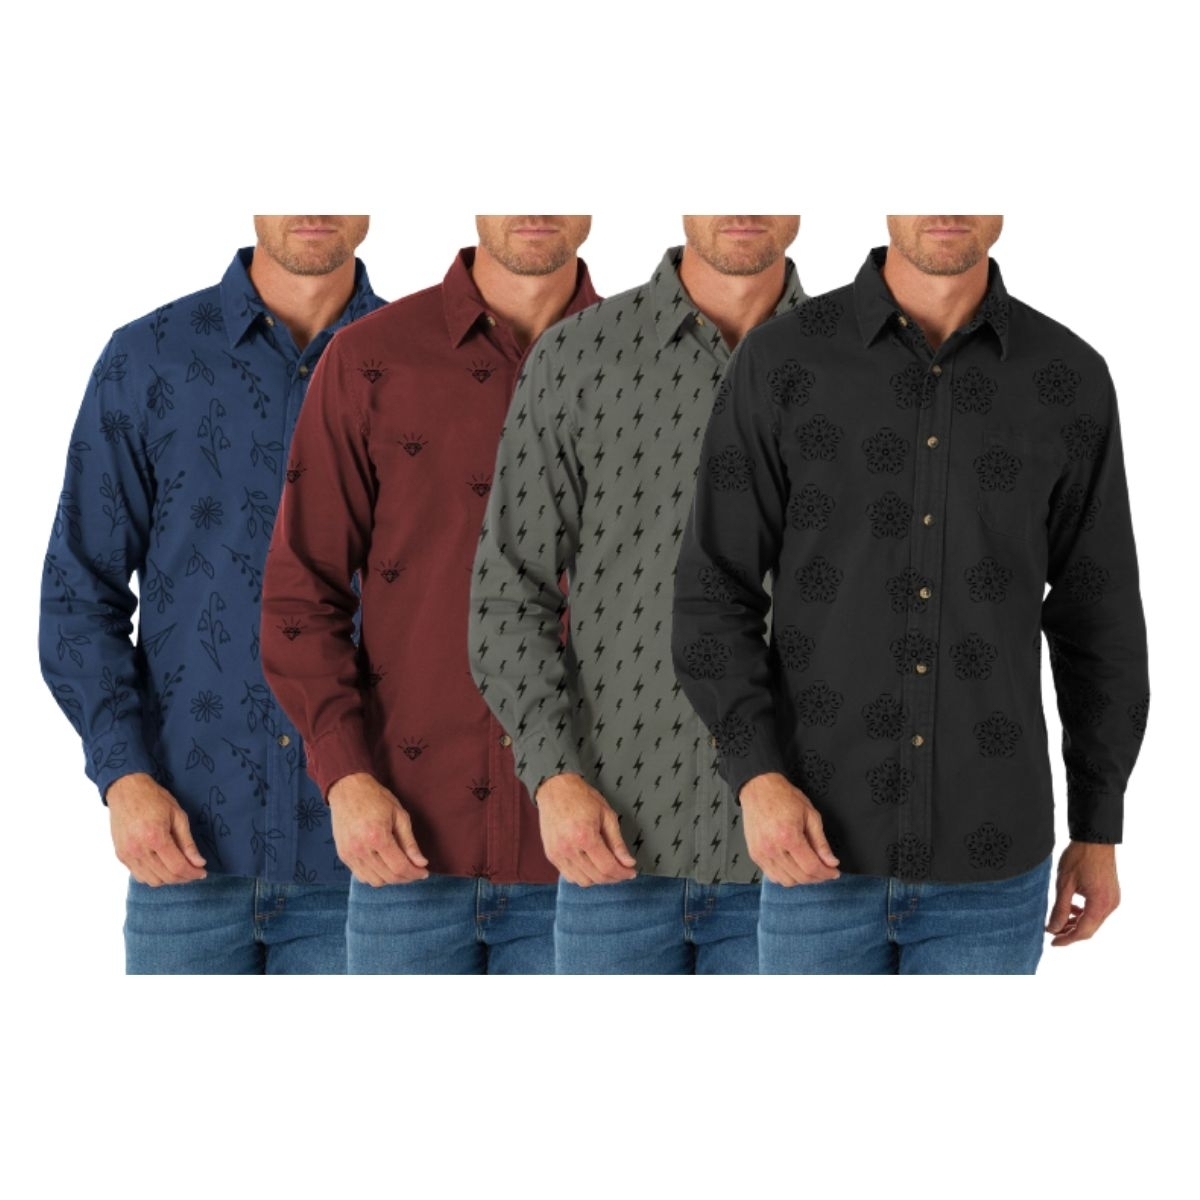 4-Pack: Men's Formal Classic Slim Fit Button Down Long Sleeve Printed Dress Shirt - Large